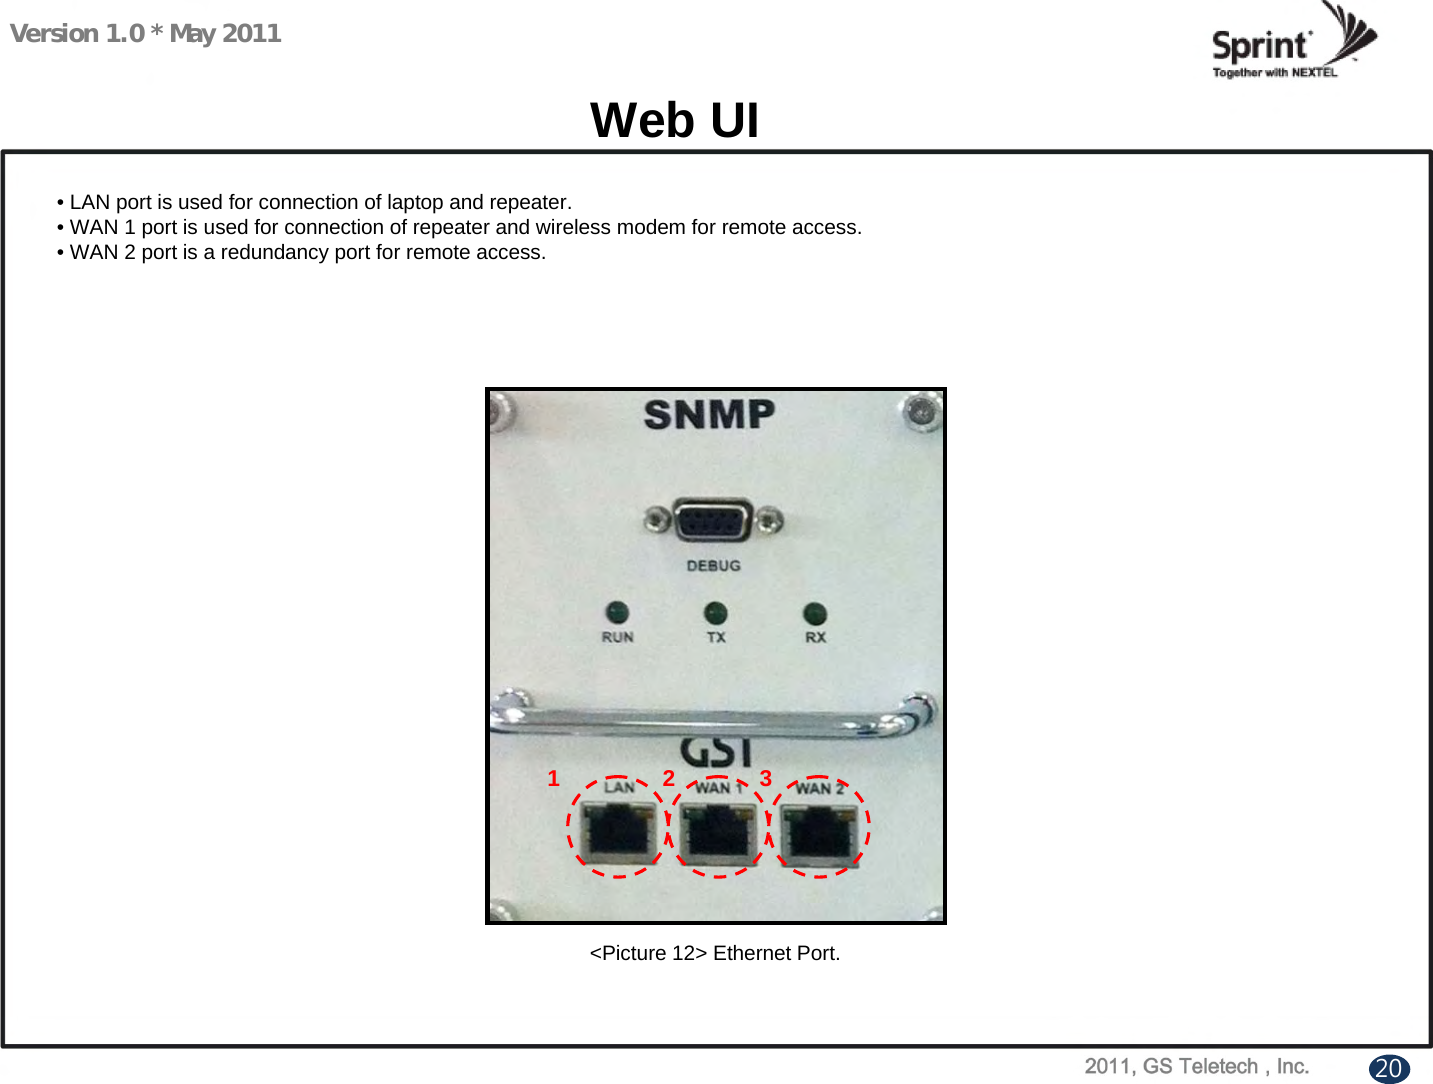 Version 1.0 * May 2011Web UI• LAN port is used for connection of laptop and repeater.• WAN 1 port is used for connection of repeater and wireless modem for remote access.• WAN 2 port is a redundancy port for remote access.&lt;Picture 12&gt; Ethernet Port.1 2 320